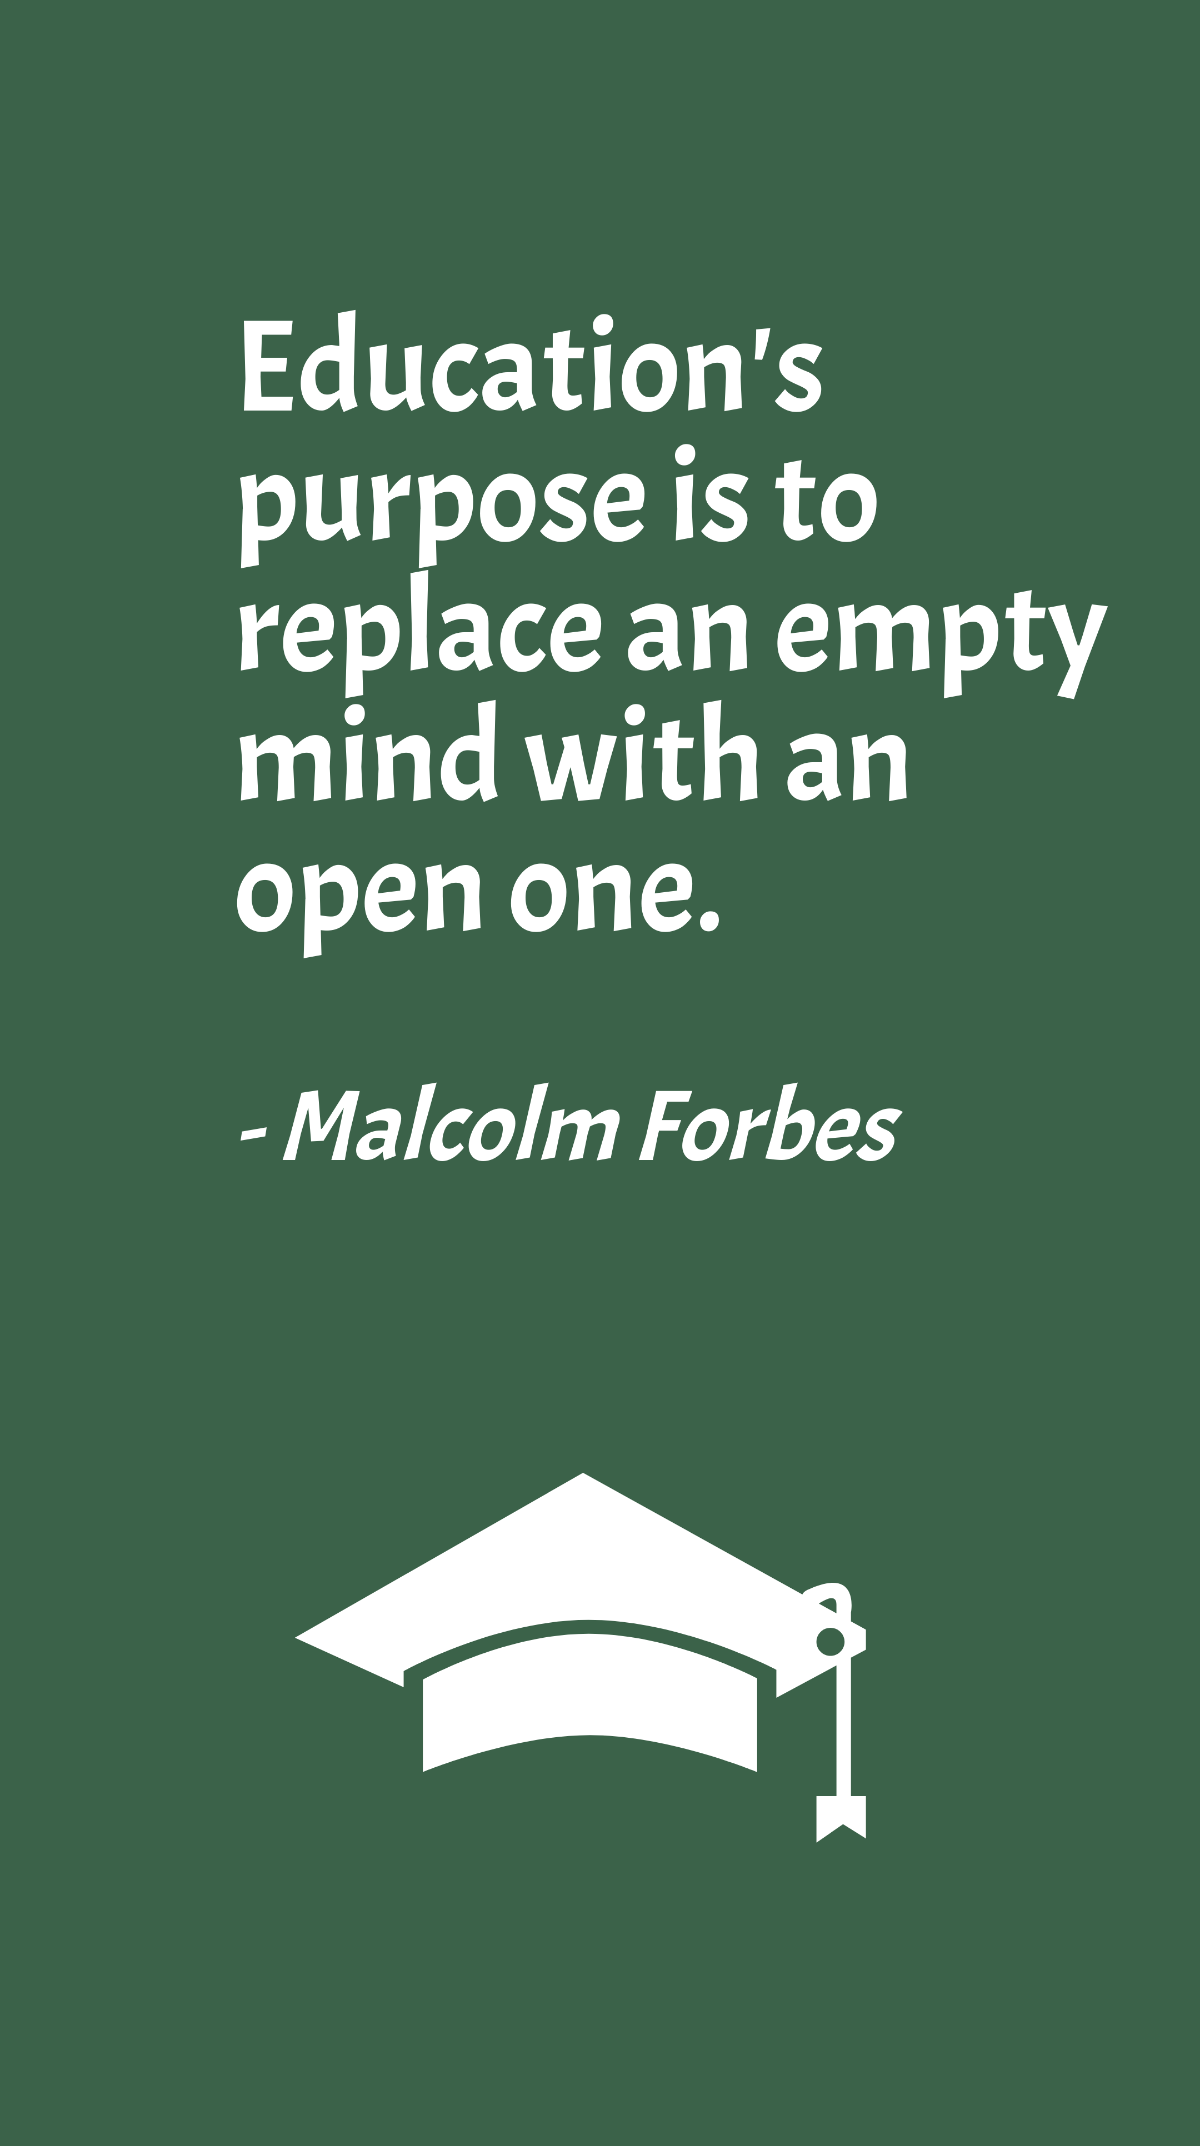 Malcolm Forbes - Education's purpose is to replace an empty mind with an open one.